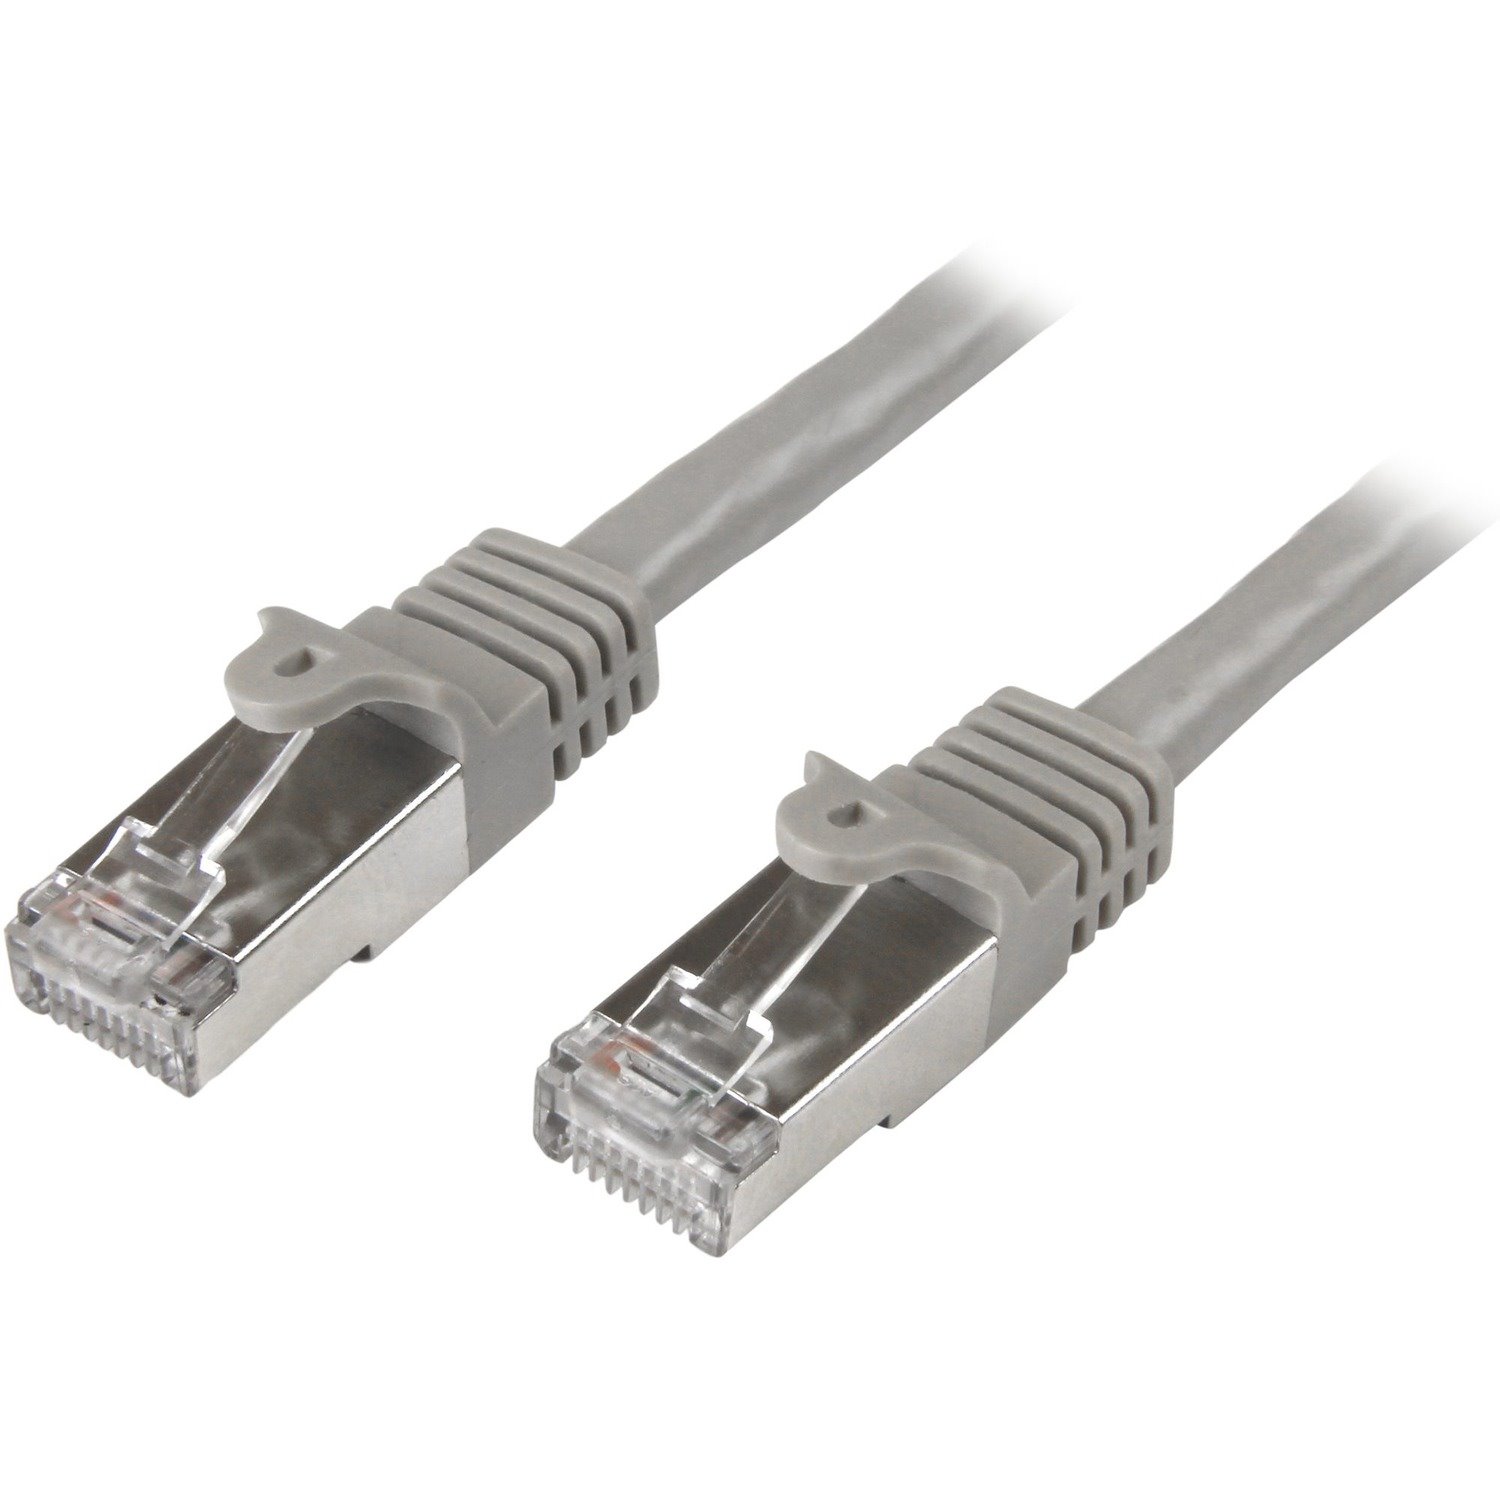 StarTech.com 5m Cat6 Patch Cable - Shielded (SFTP) Snagless Gigabit Network Patch Cable - Gray Cat 6 Ethernet Patch Lead